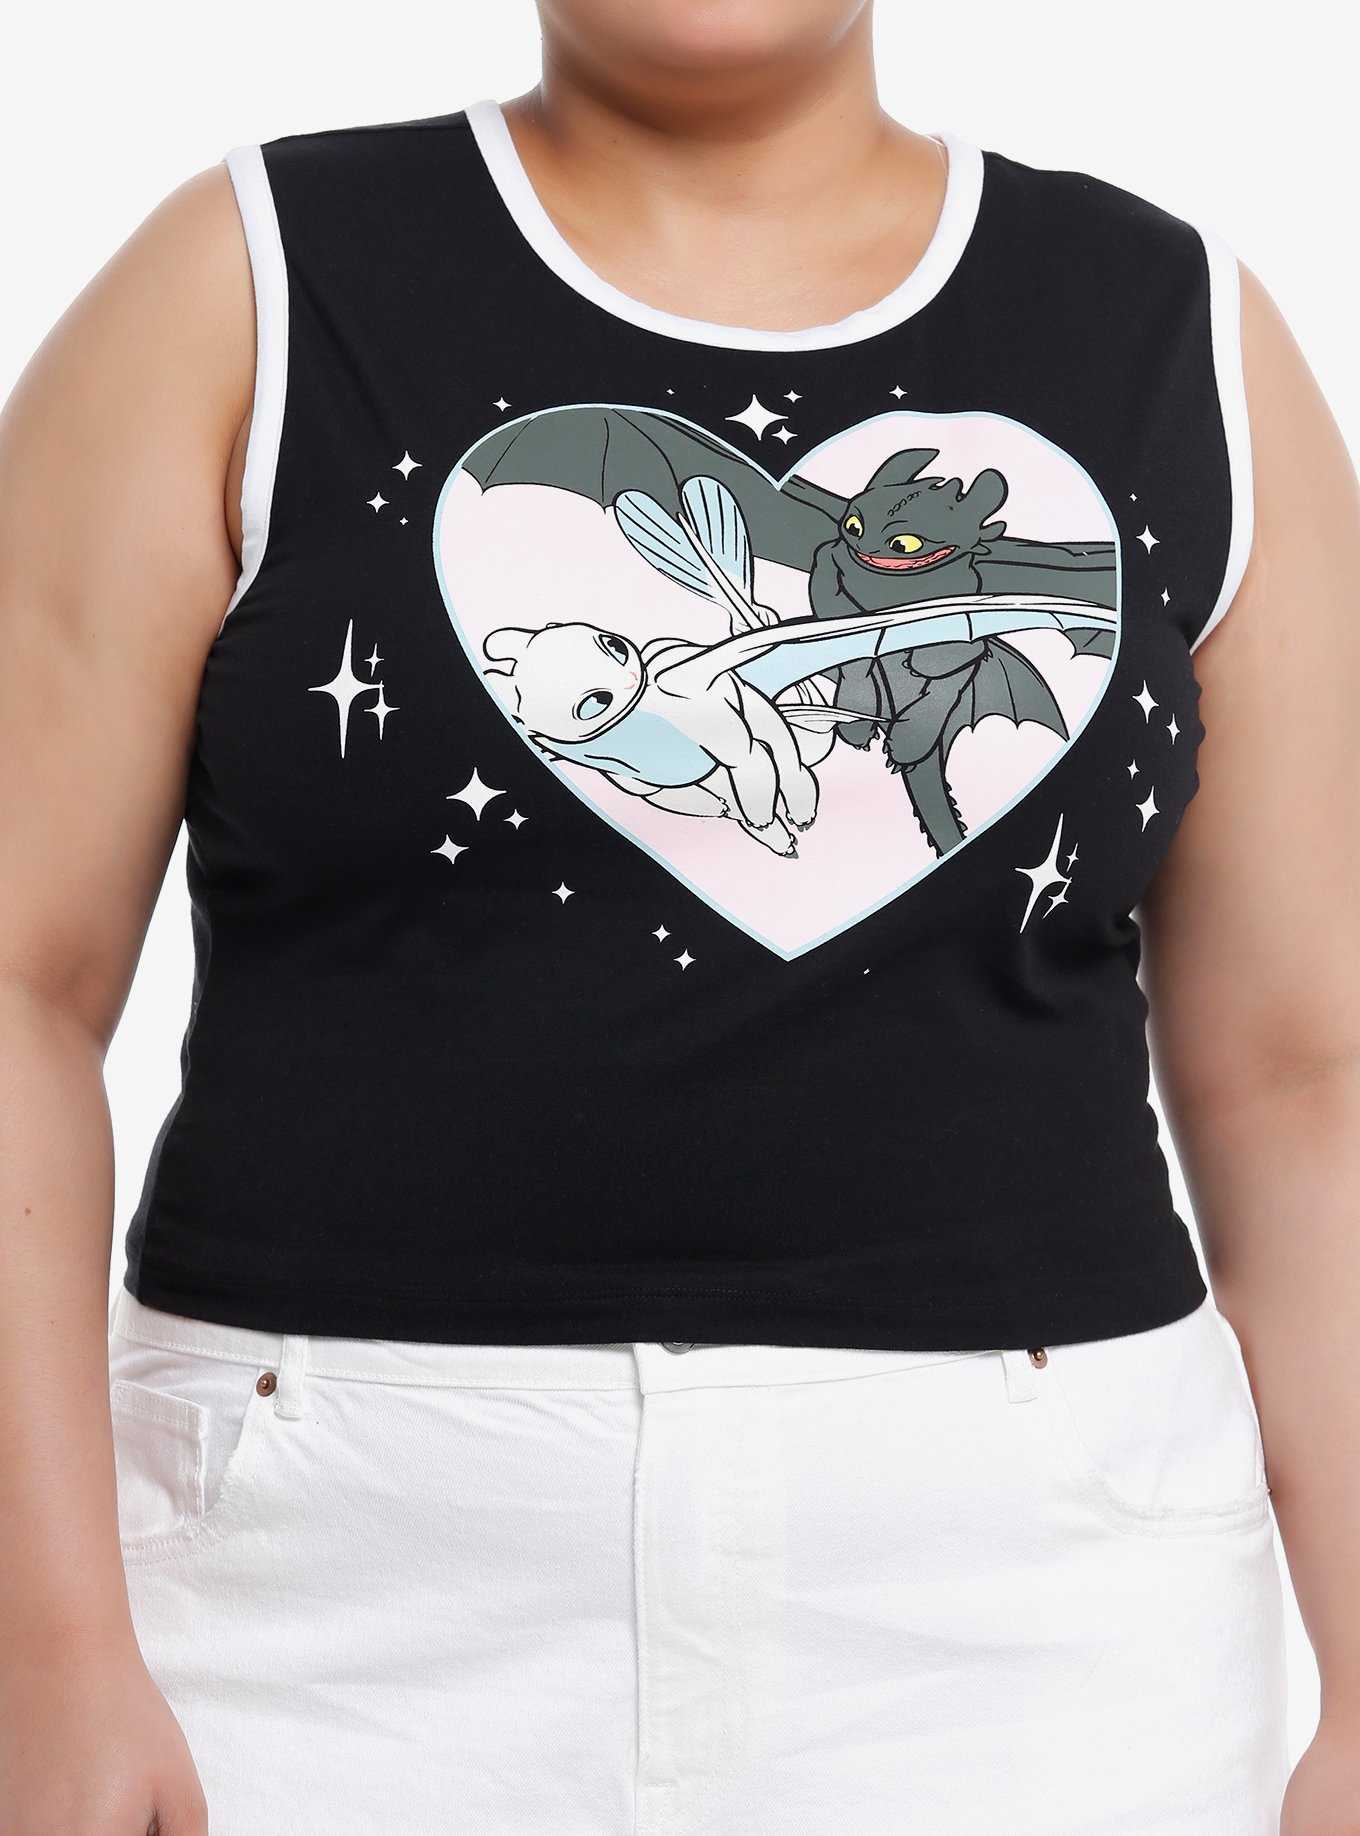 How To Train Your Dragon Toothless & Light Fury Girls Tank Top Plus Size, , hi-res